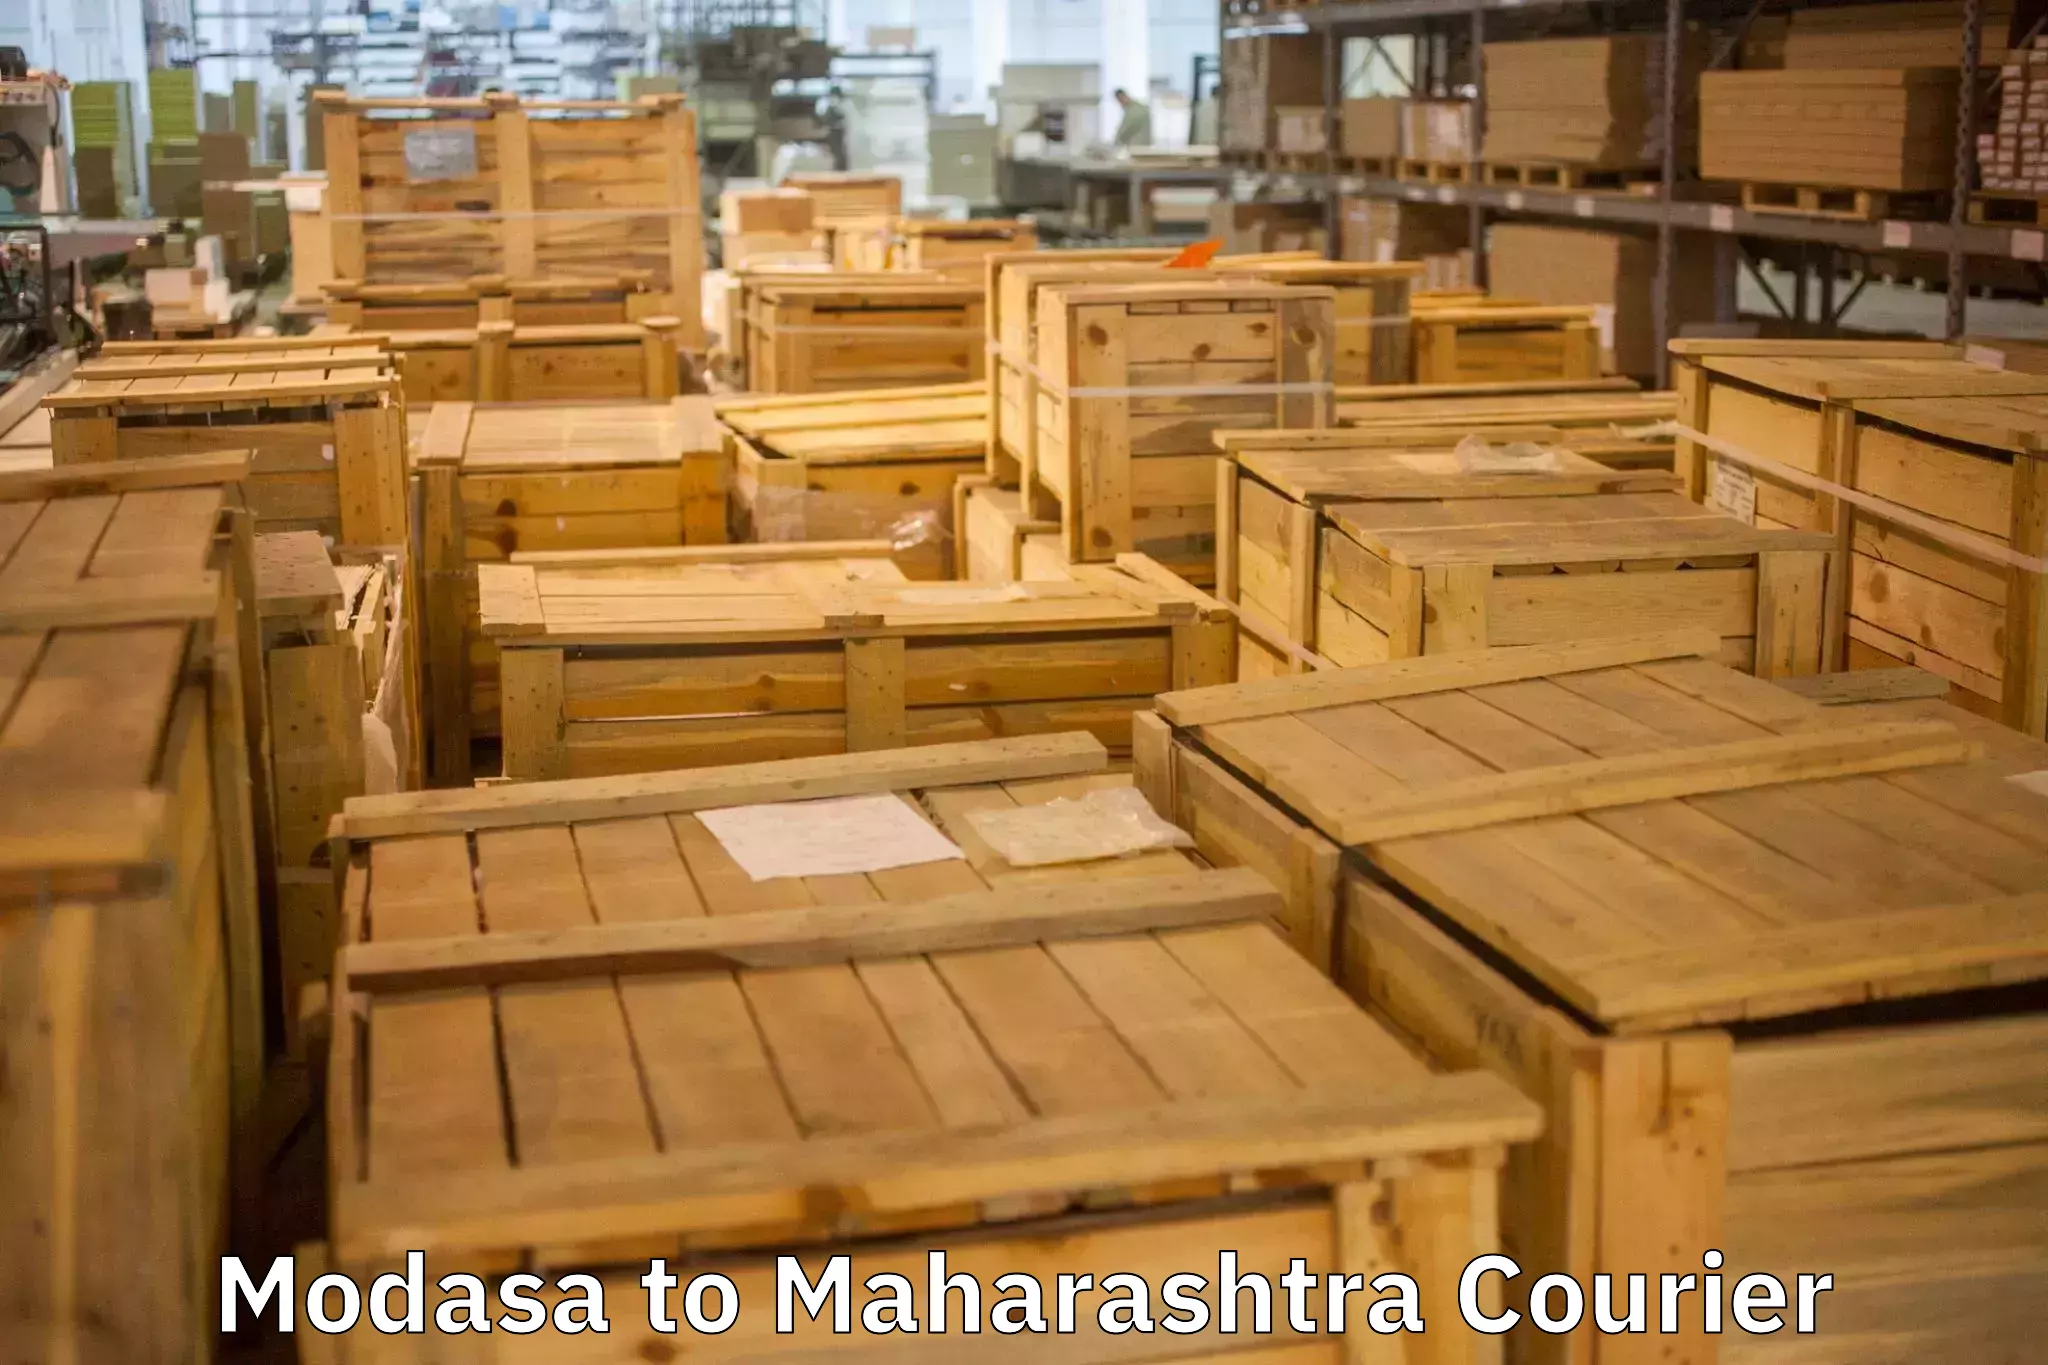 Moving and storage services in Modasa to Maharashtra